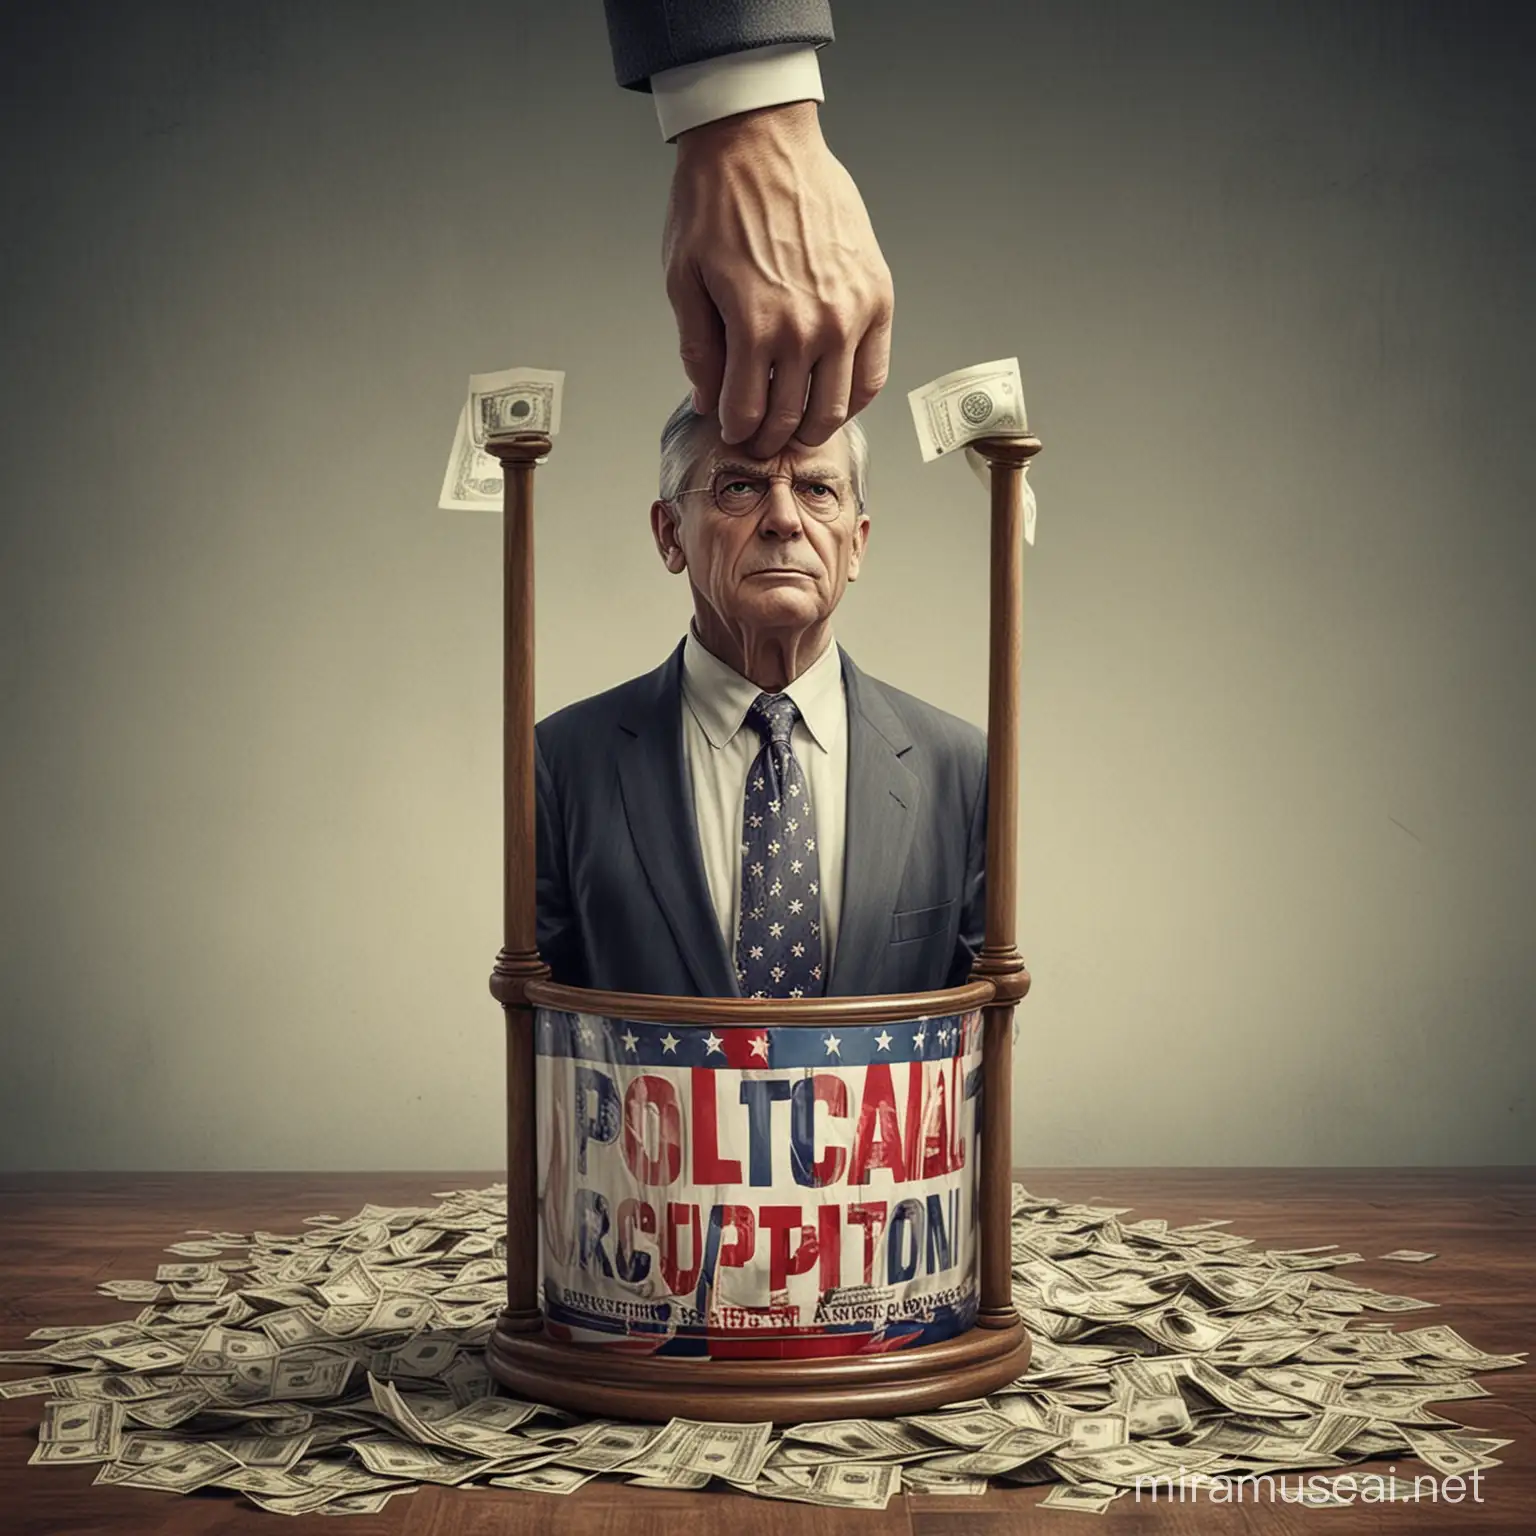 Generate an image that represents the concept of "political corruption" in a symbolic or literal way.